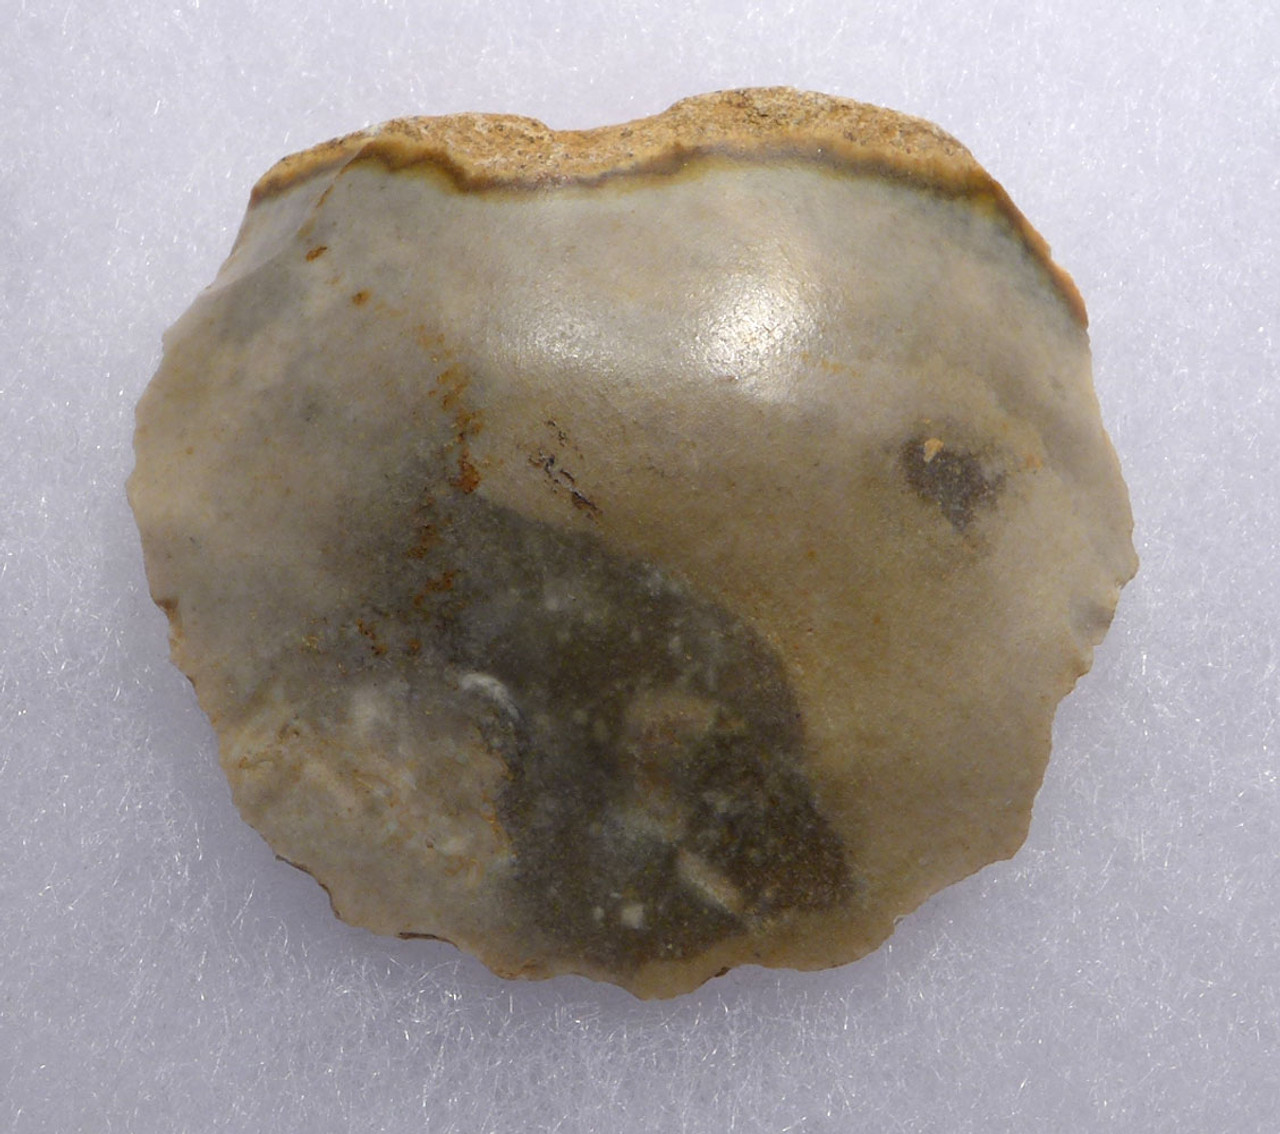 NEANDERTHAL MOUSTERIAN DISCOIDAL SCRAPER FLAKE TOOL FROM CAEN FRANCE  *M440